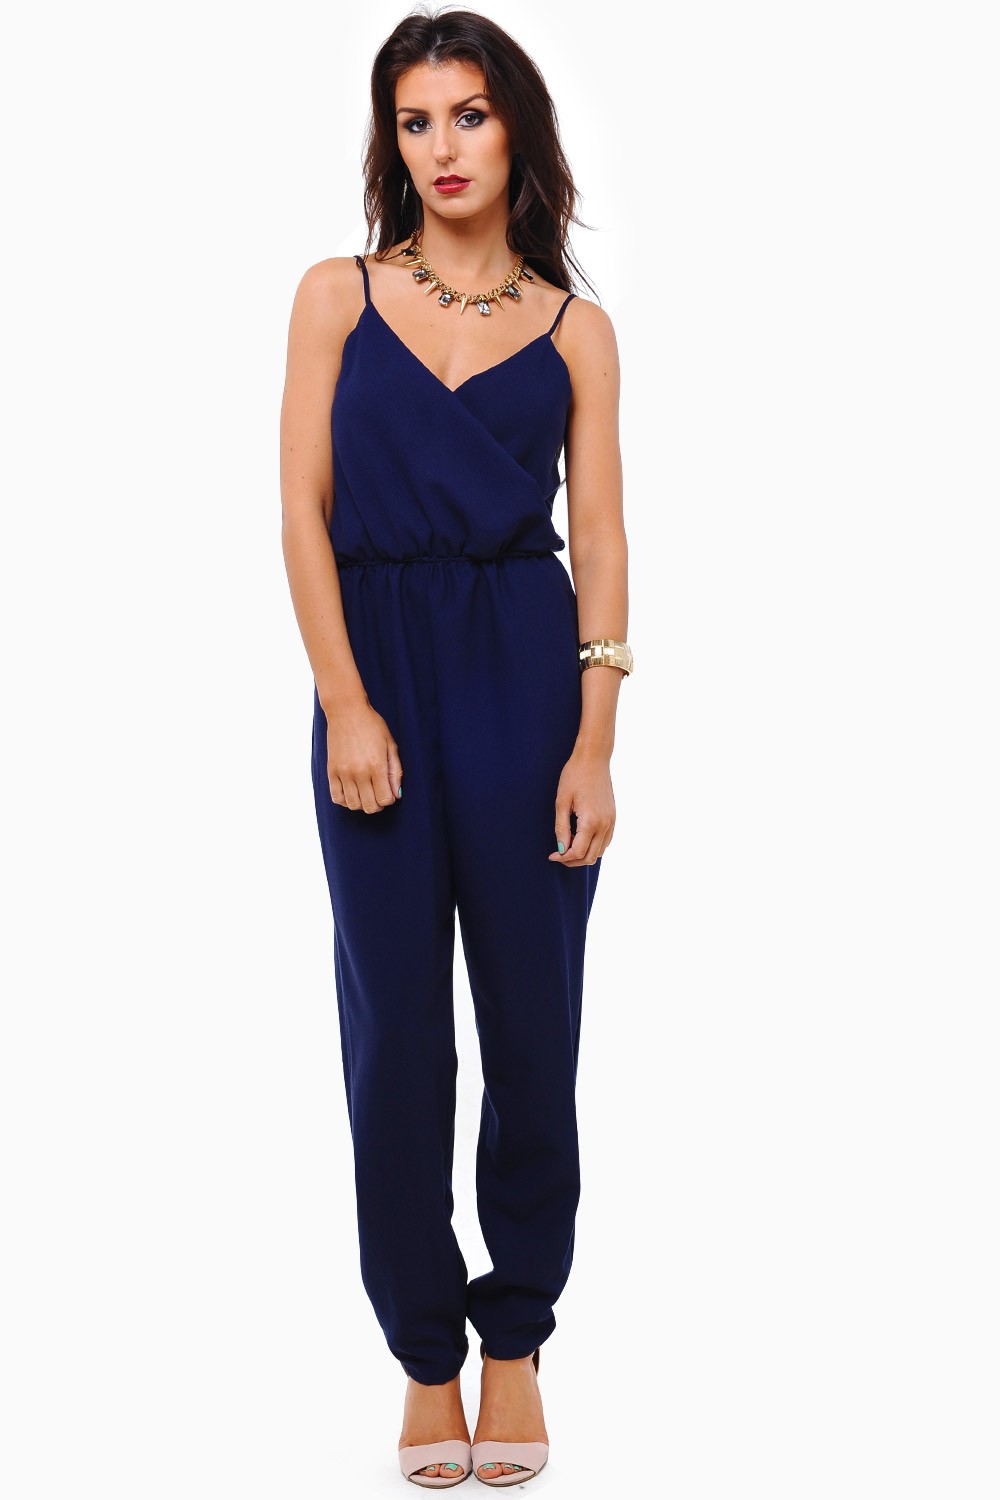 John Zack Kacey Strappy Jumpsuit in Navy | iCLOTHING